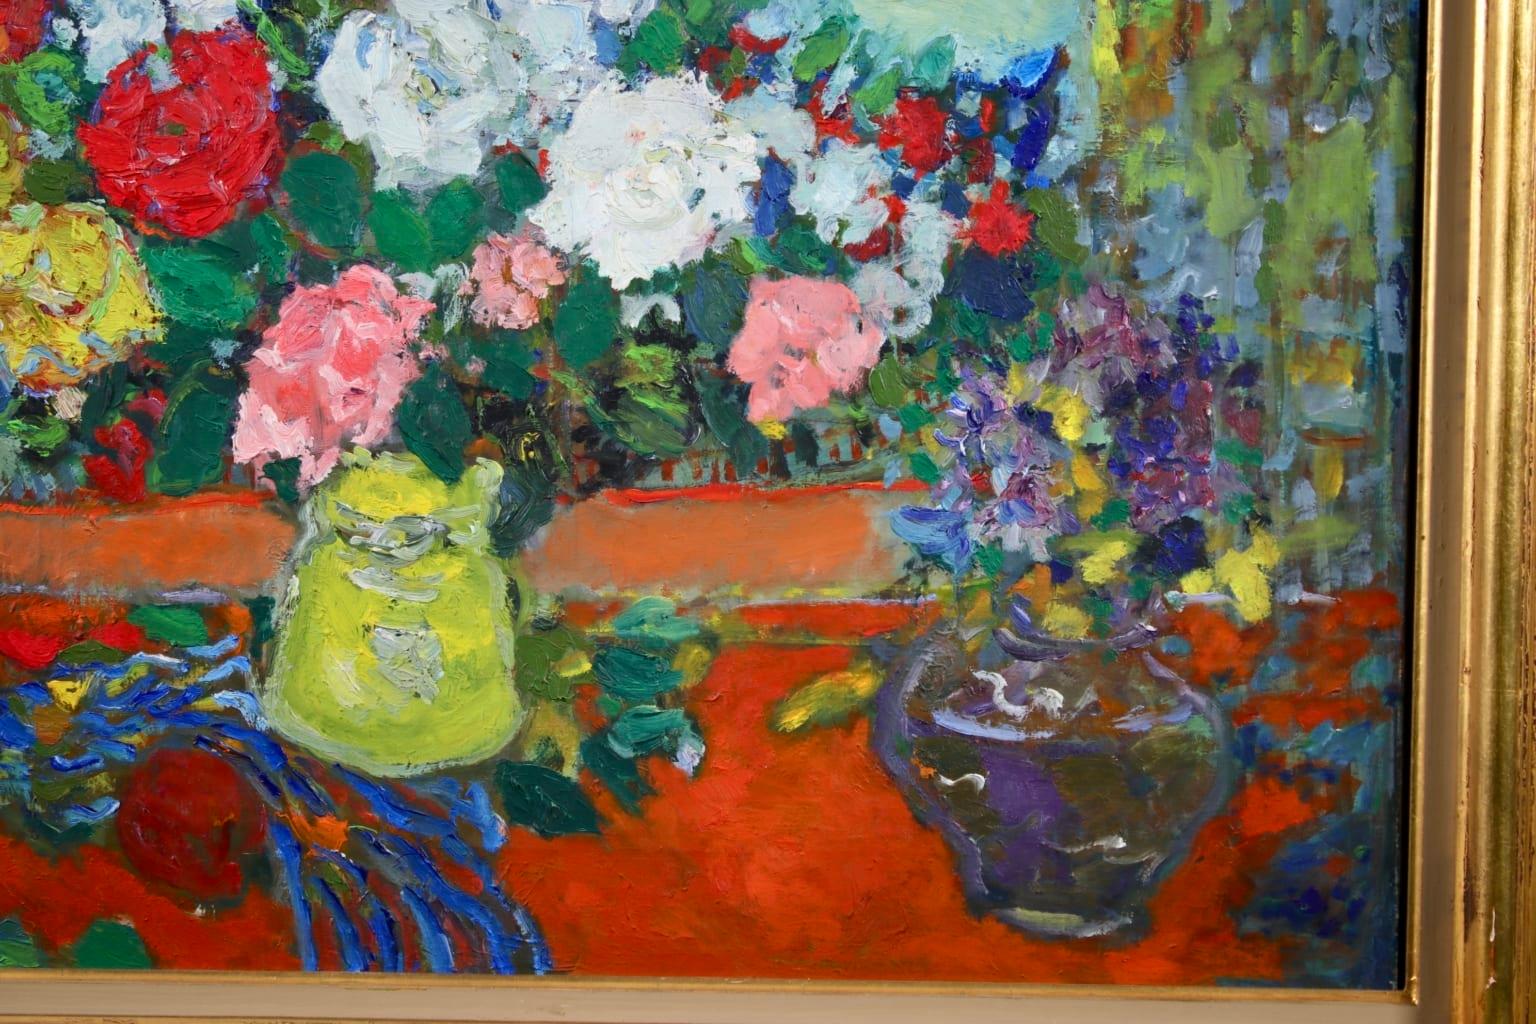 Bouquet de Roses - Post Impressionist Oil, Still Life Flowers by Jean Fusaro 1